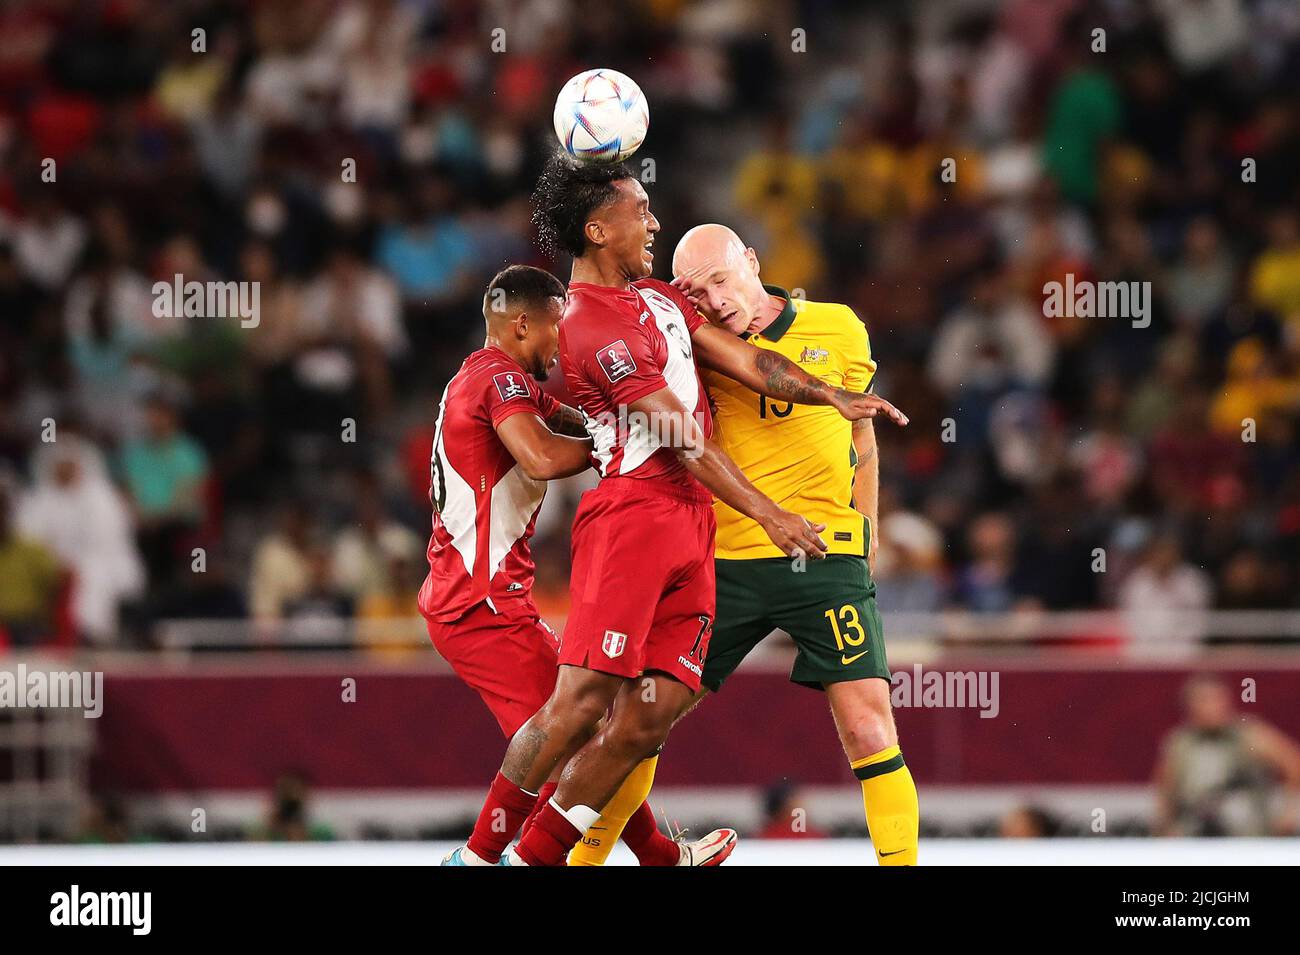 Doha, Qatar. 13th June, 2022. Aaron Mooy (R) of Australia vies with Renato Tapia (C), Christofer Gonzales of Peru during the FIFA World Cup 2022 intercontinental play-offs match between Australia and Peru at the Ahmed bin Ali Stadium, Doha, Qatar, June 13, 2022. Credit: Wang Dongzhen/Xinhua/Alamy Live News Stock Photo